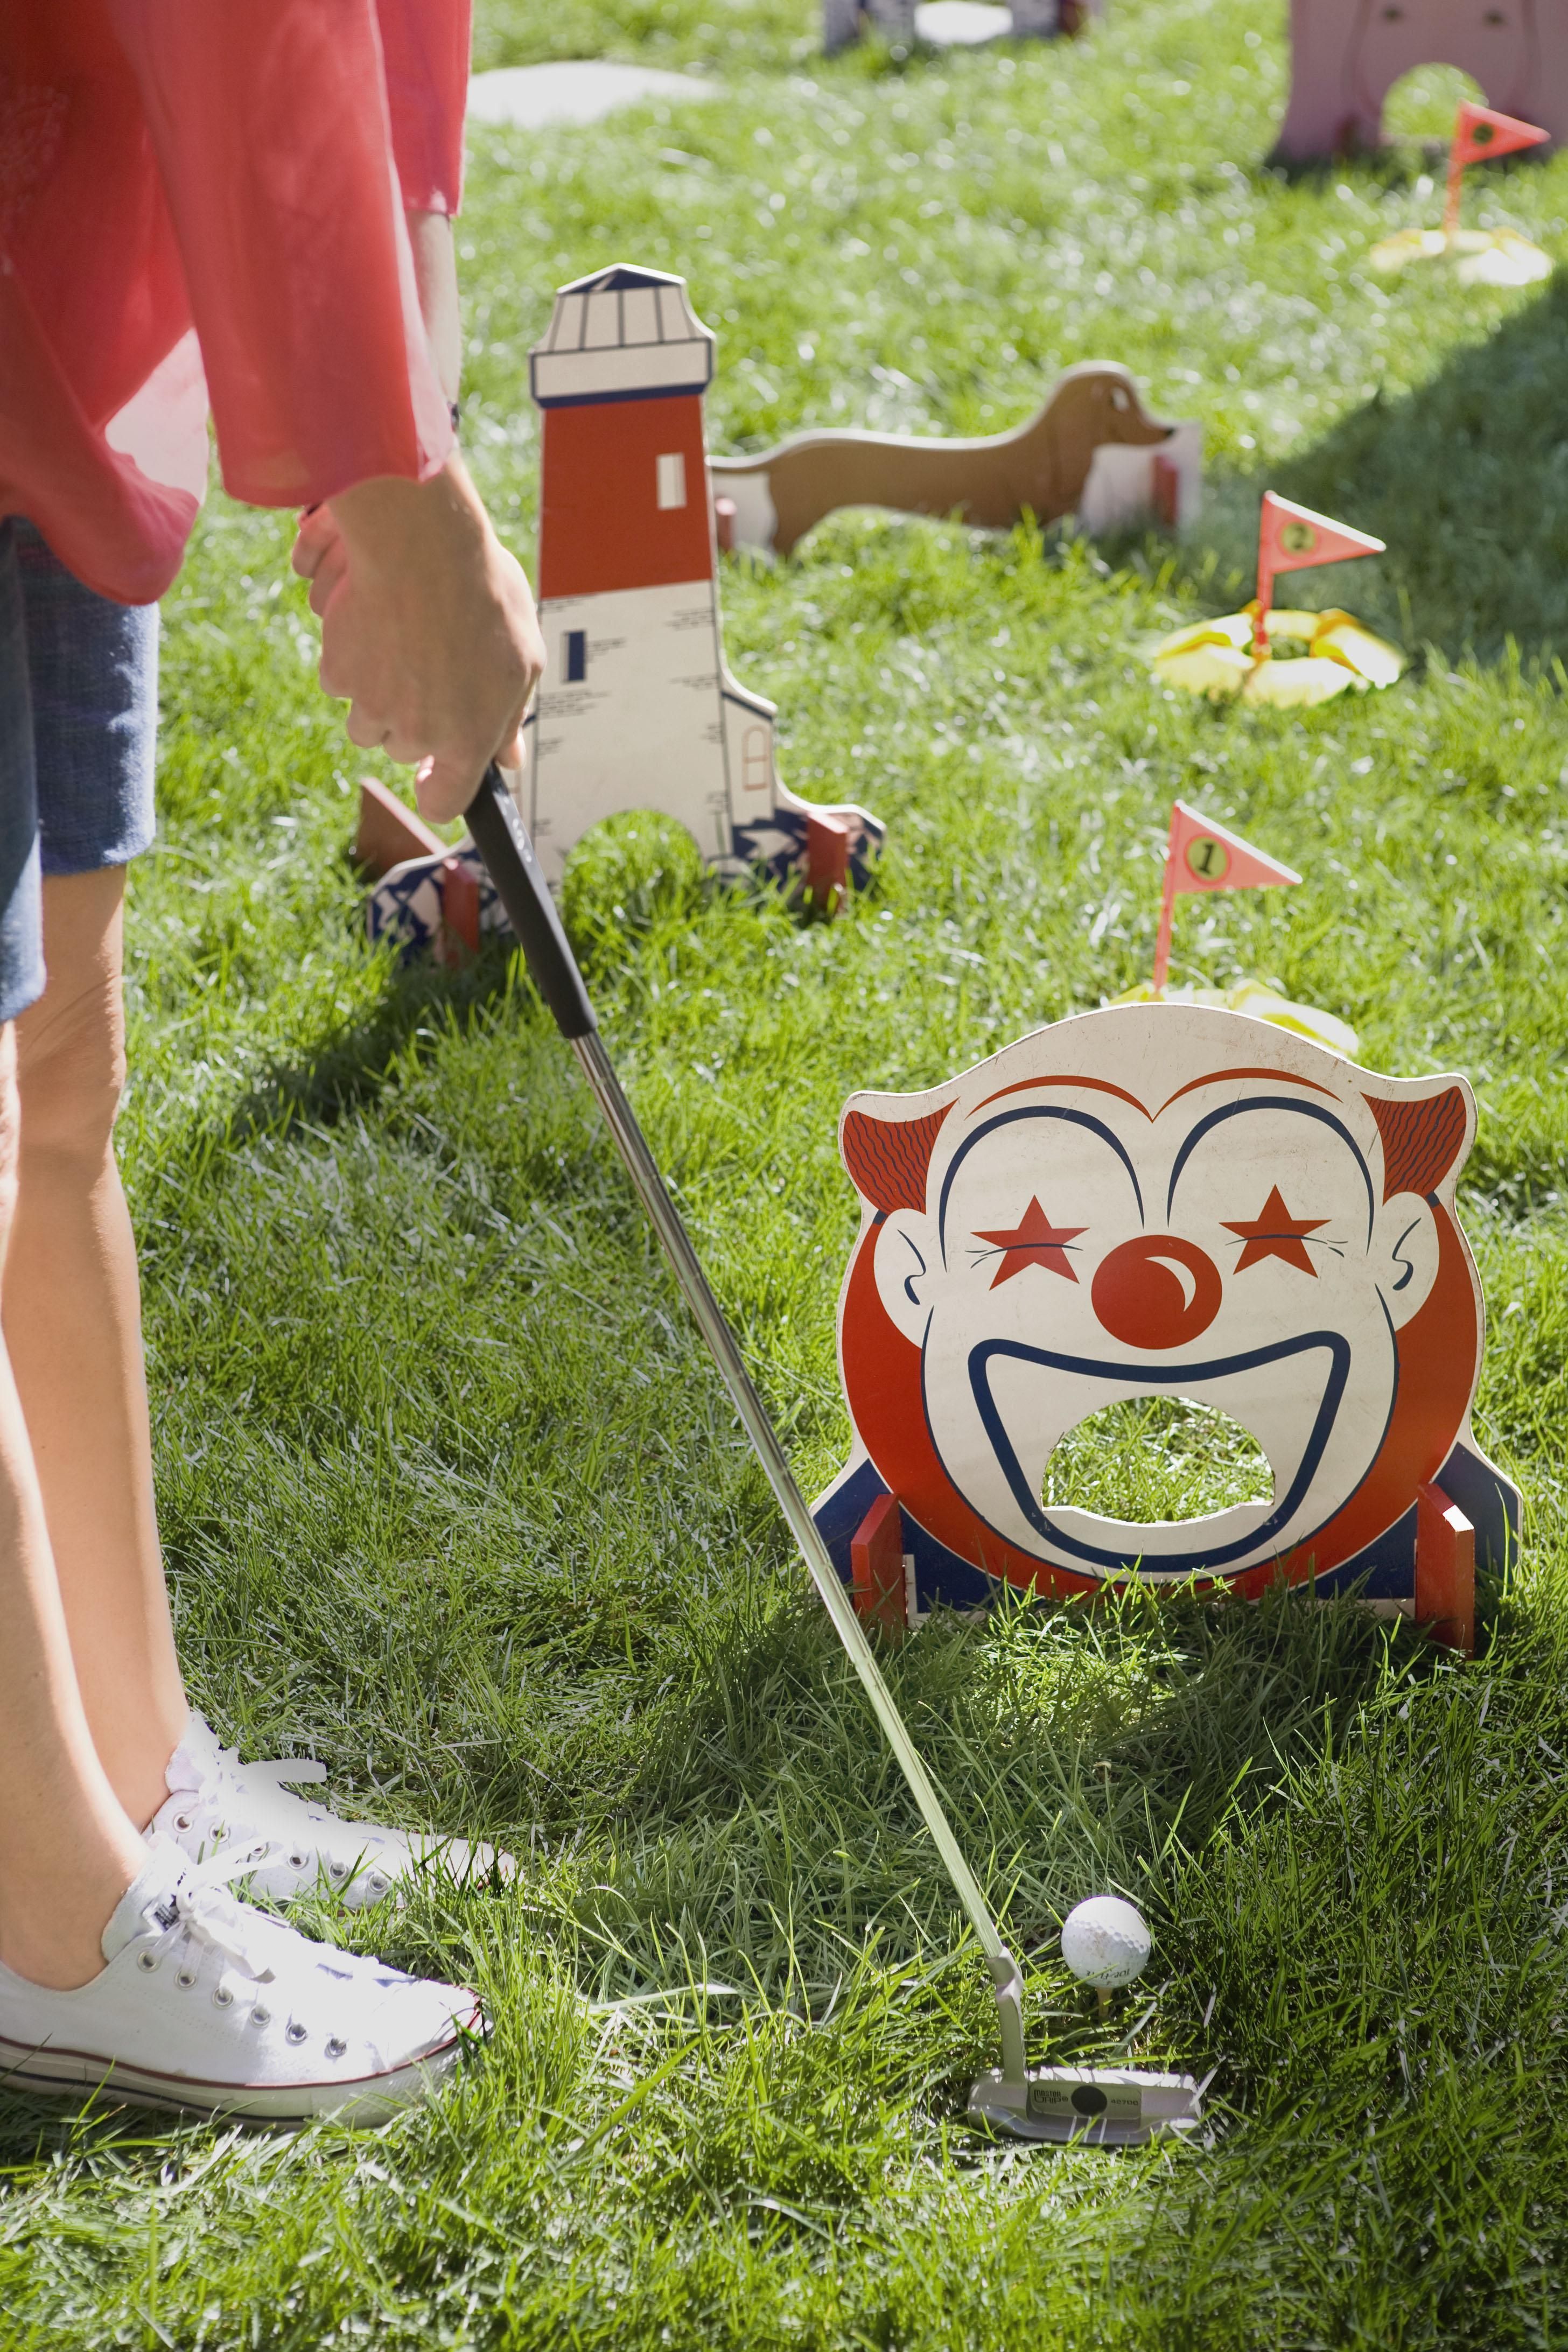 Summertime Fun: 12 Games to Play Outside